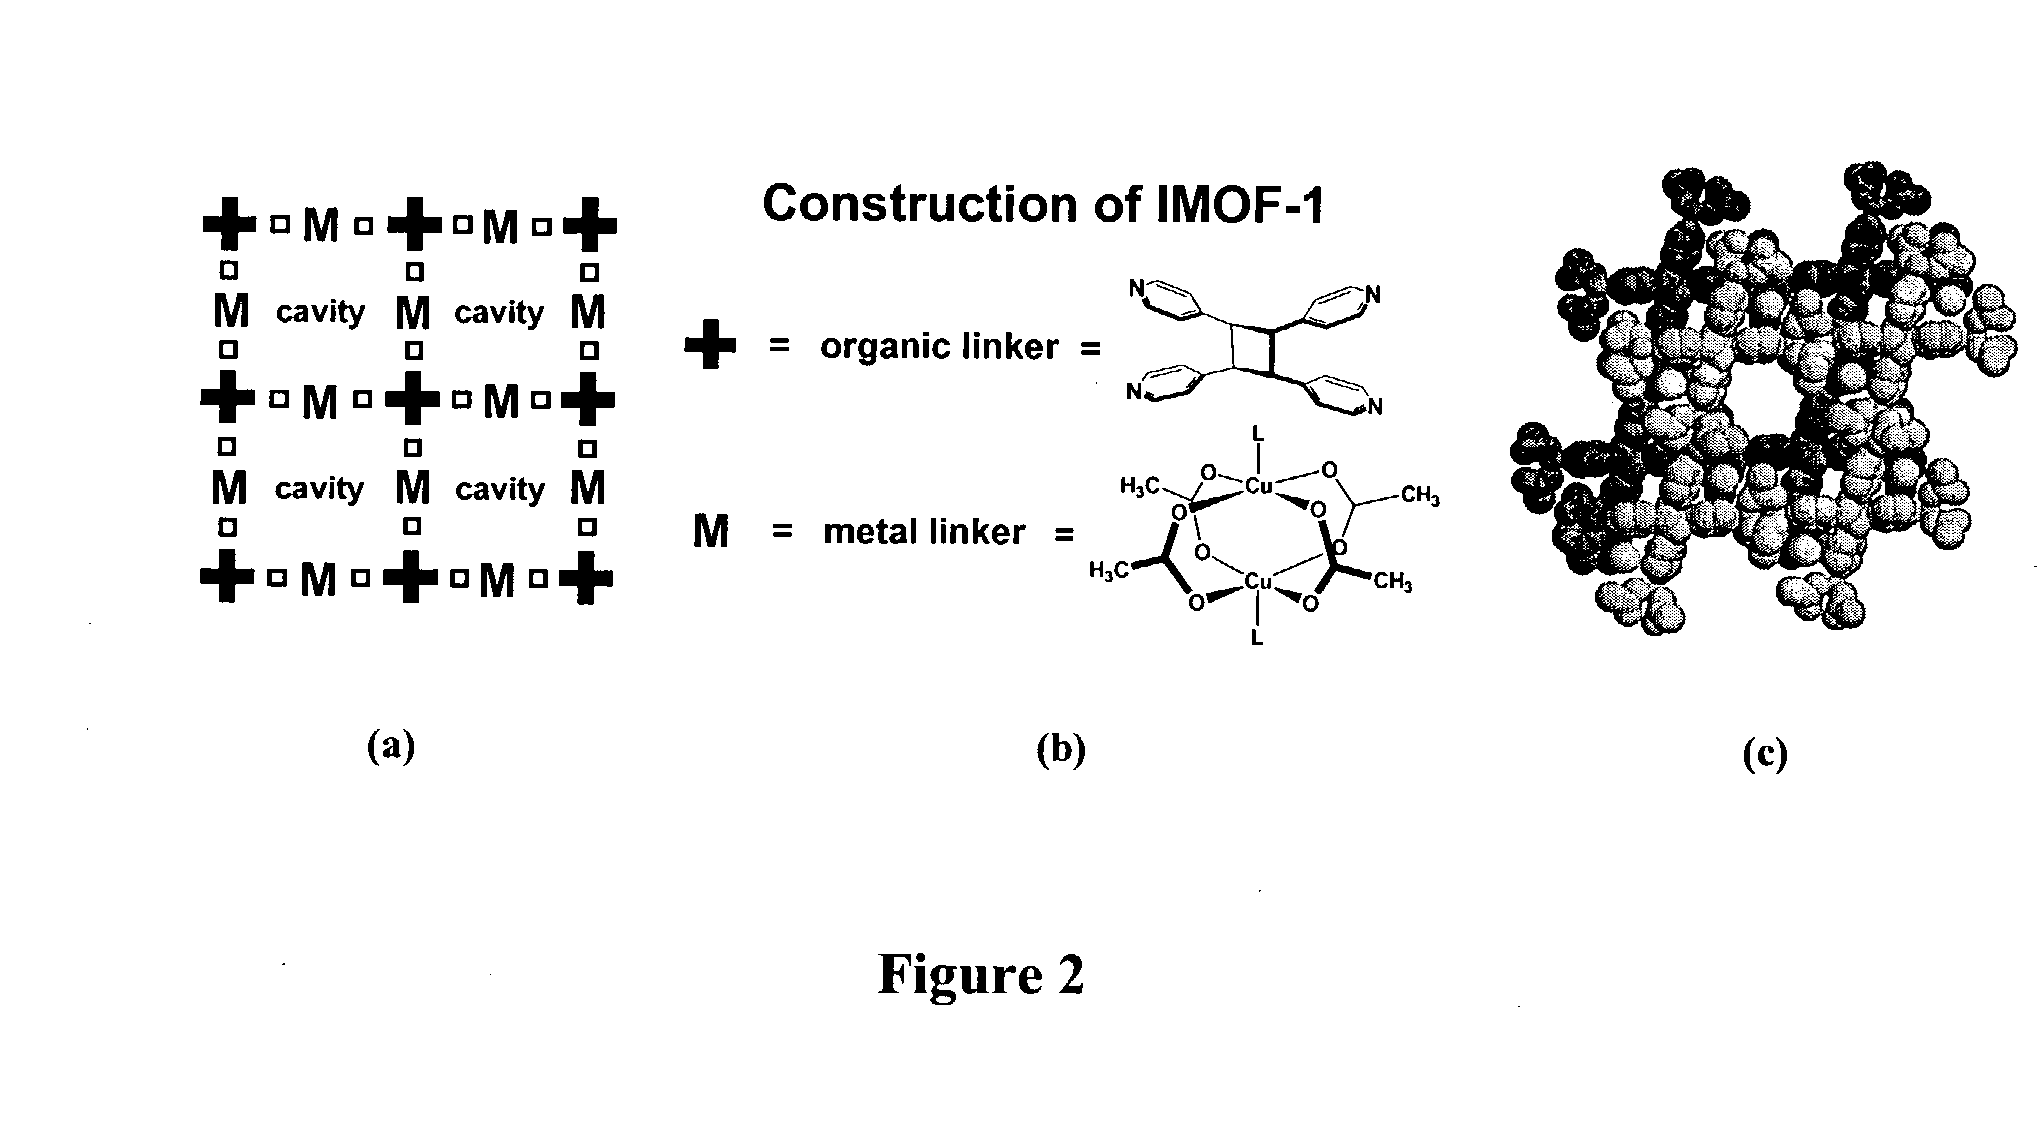 Gas storage materials and devices